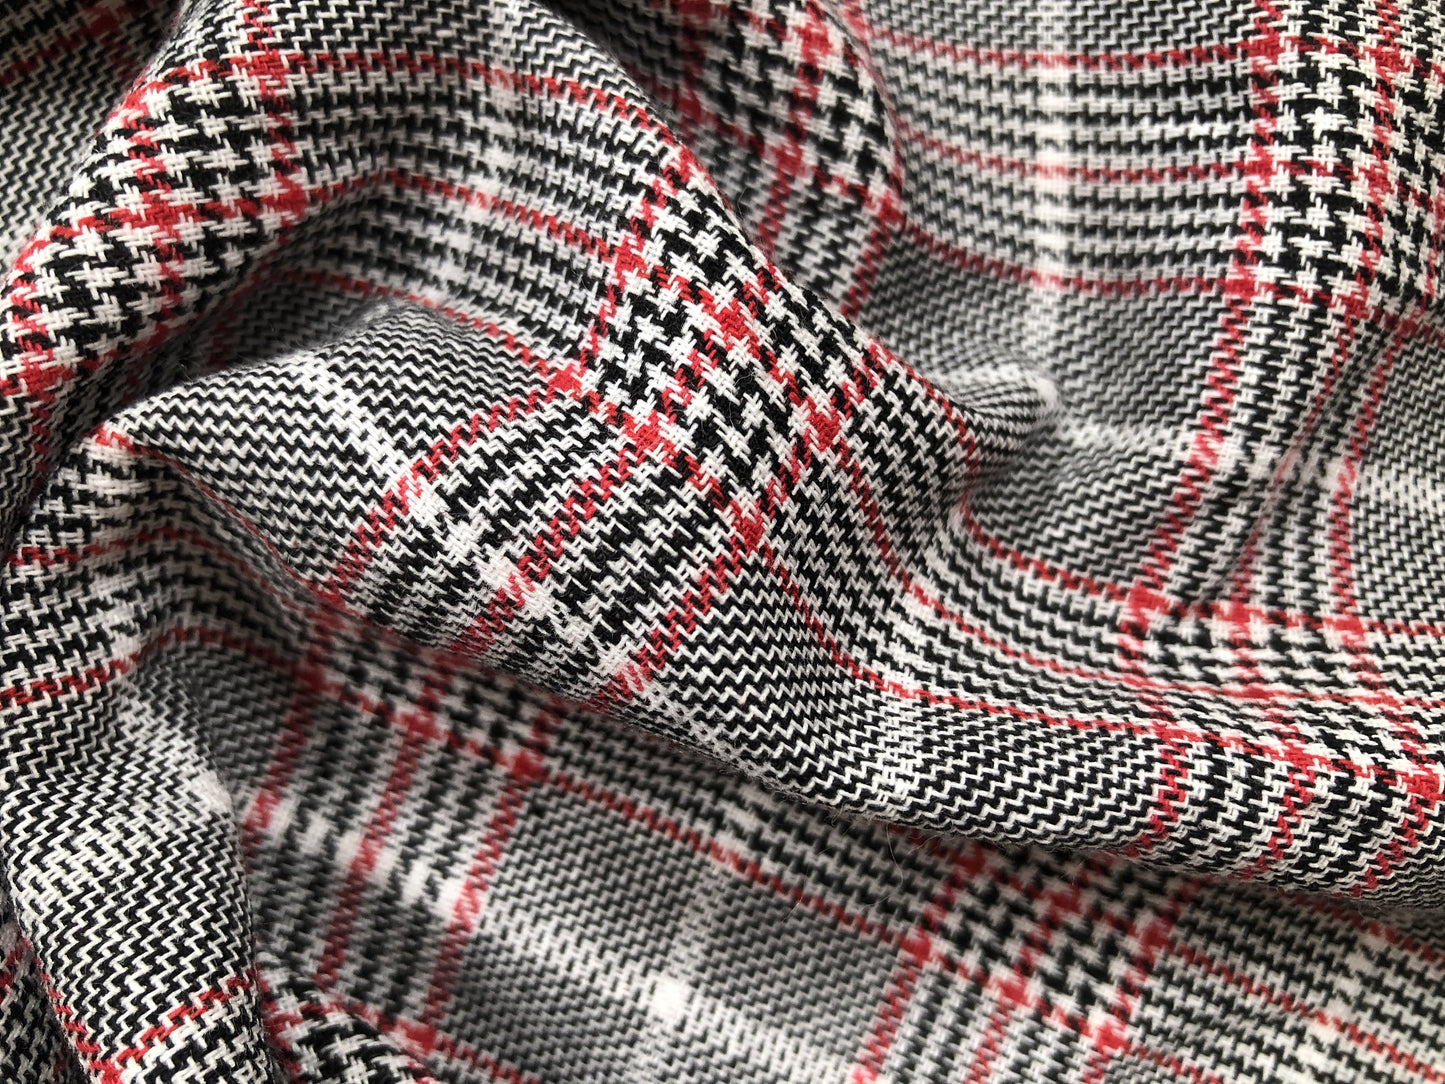 Classic Plaid houndstooth menswear plaid Woven Fabric 2 Yards